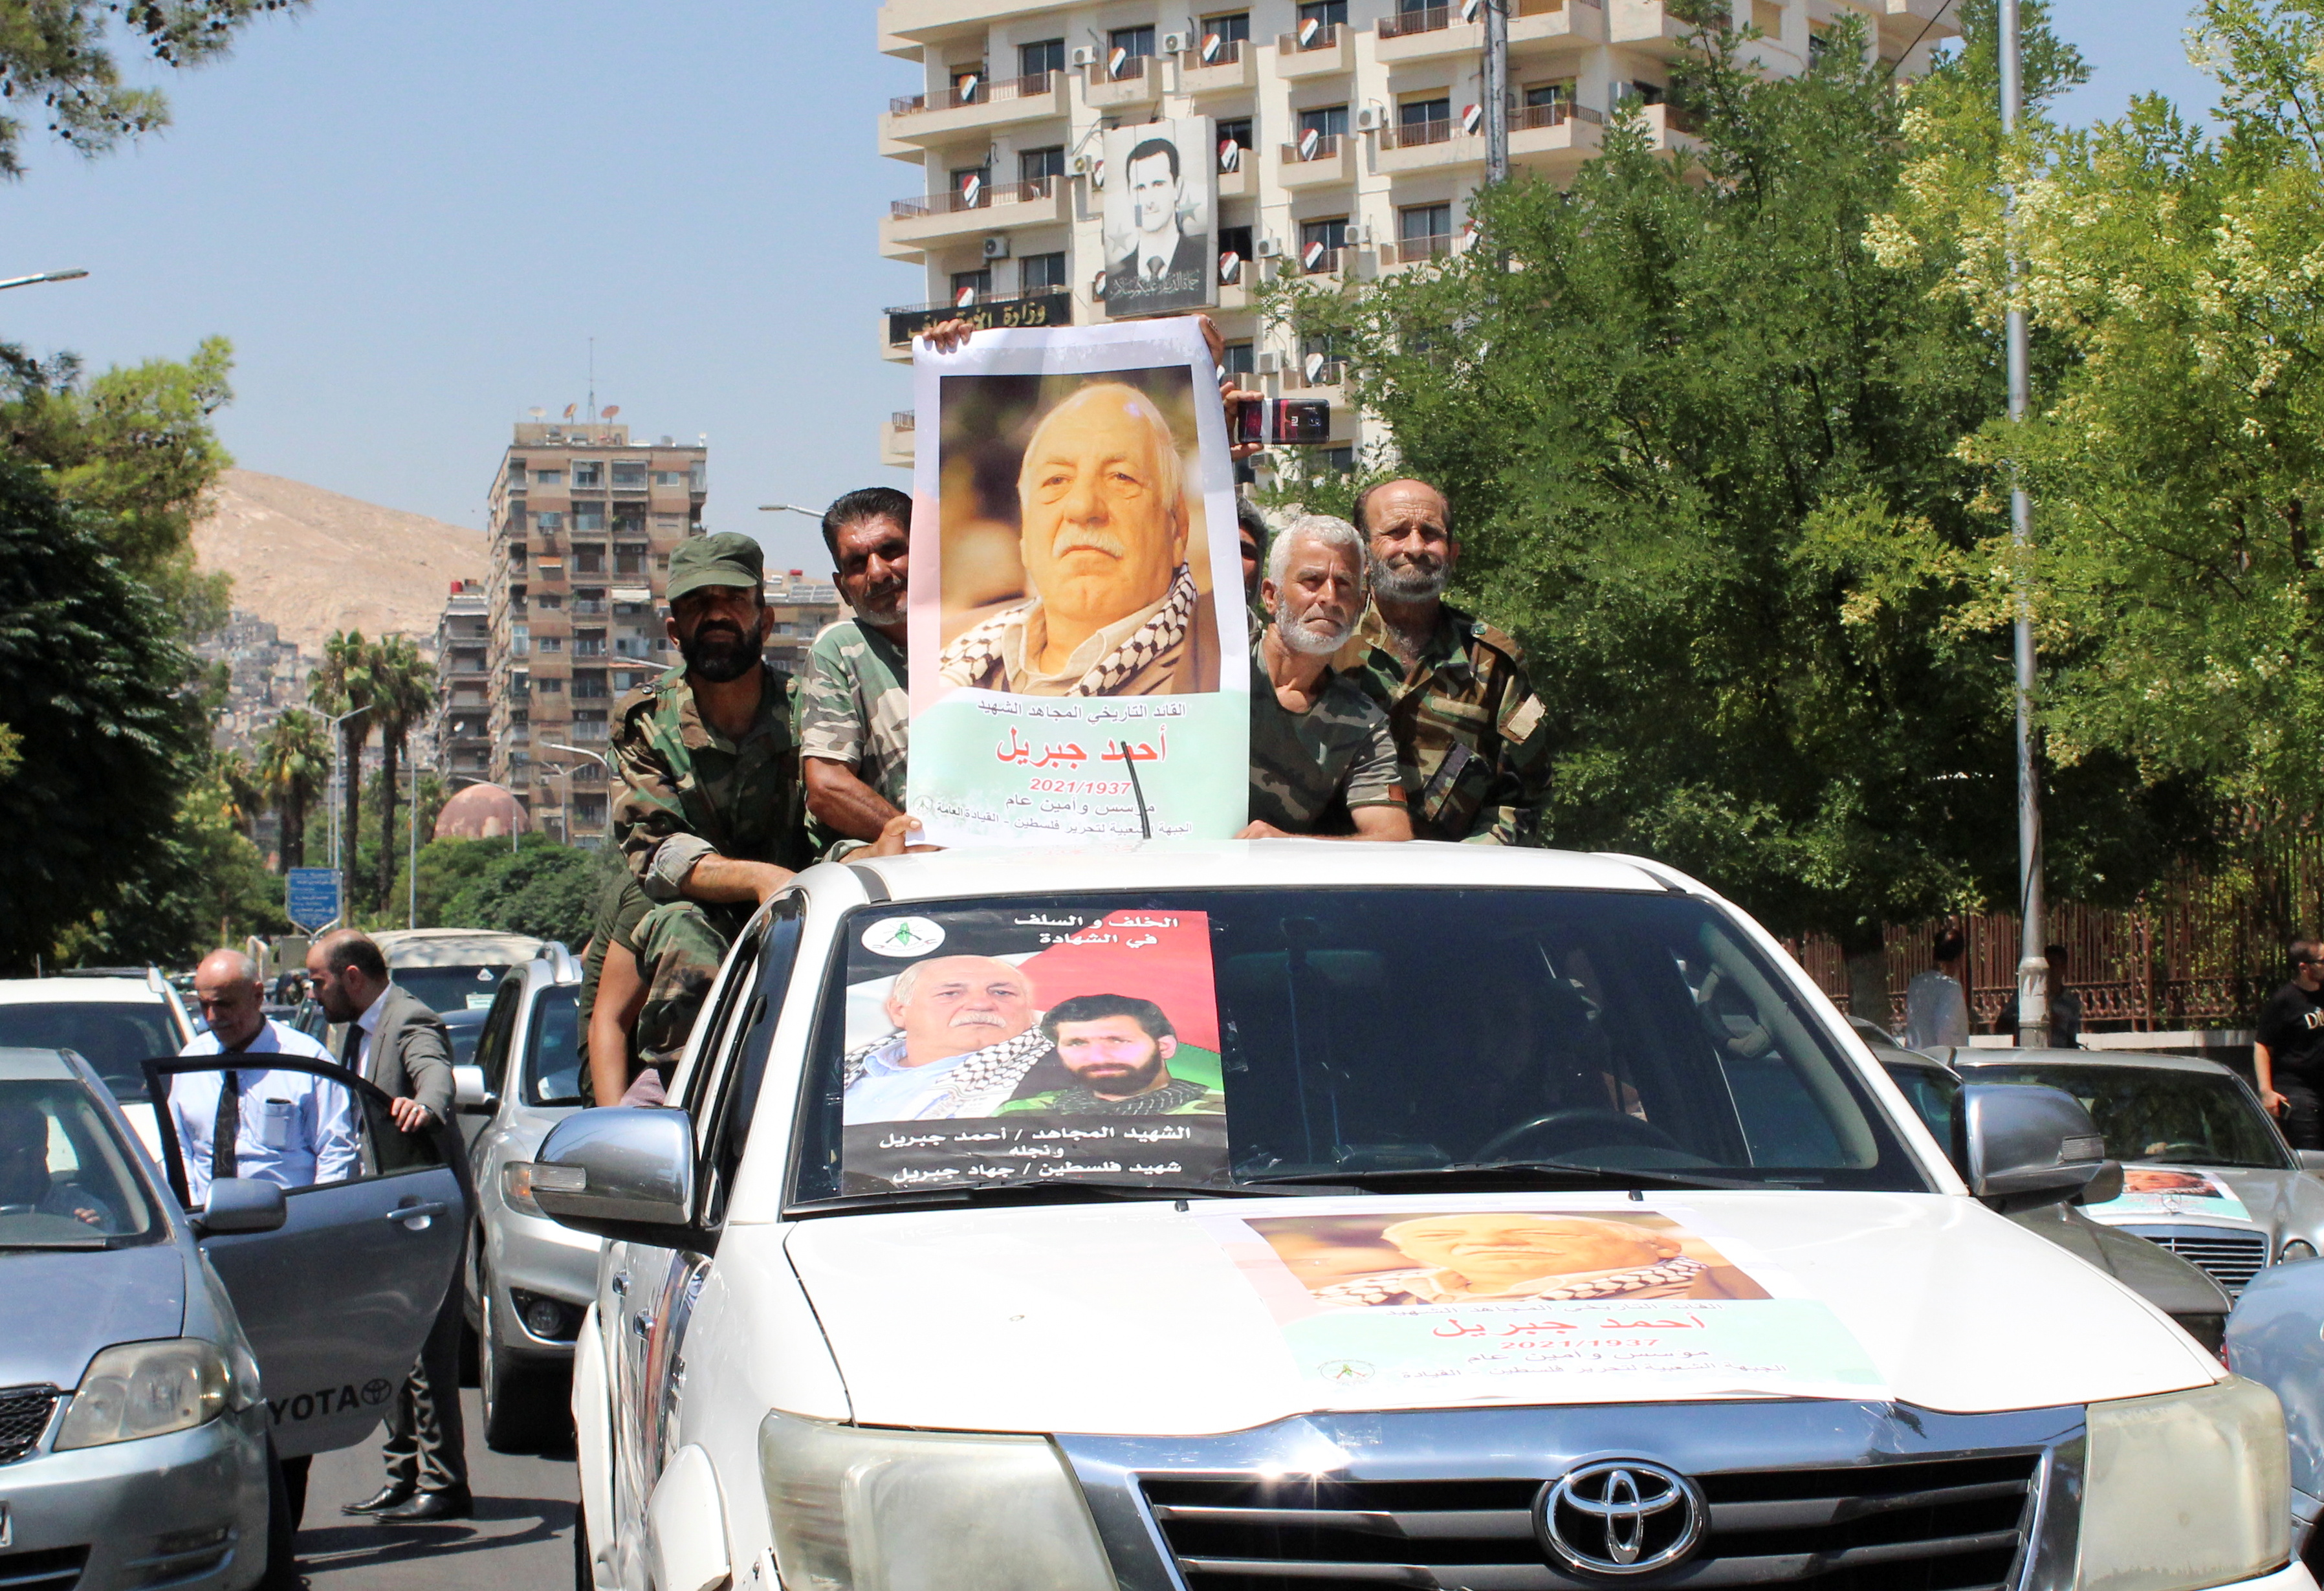 Mourners stand on a back of a vehicle as they hold a picture of Ahmed Jibril, founder of pro-Syrian Palestinian guerrilla faction during his funeral in Damascus